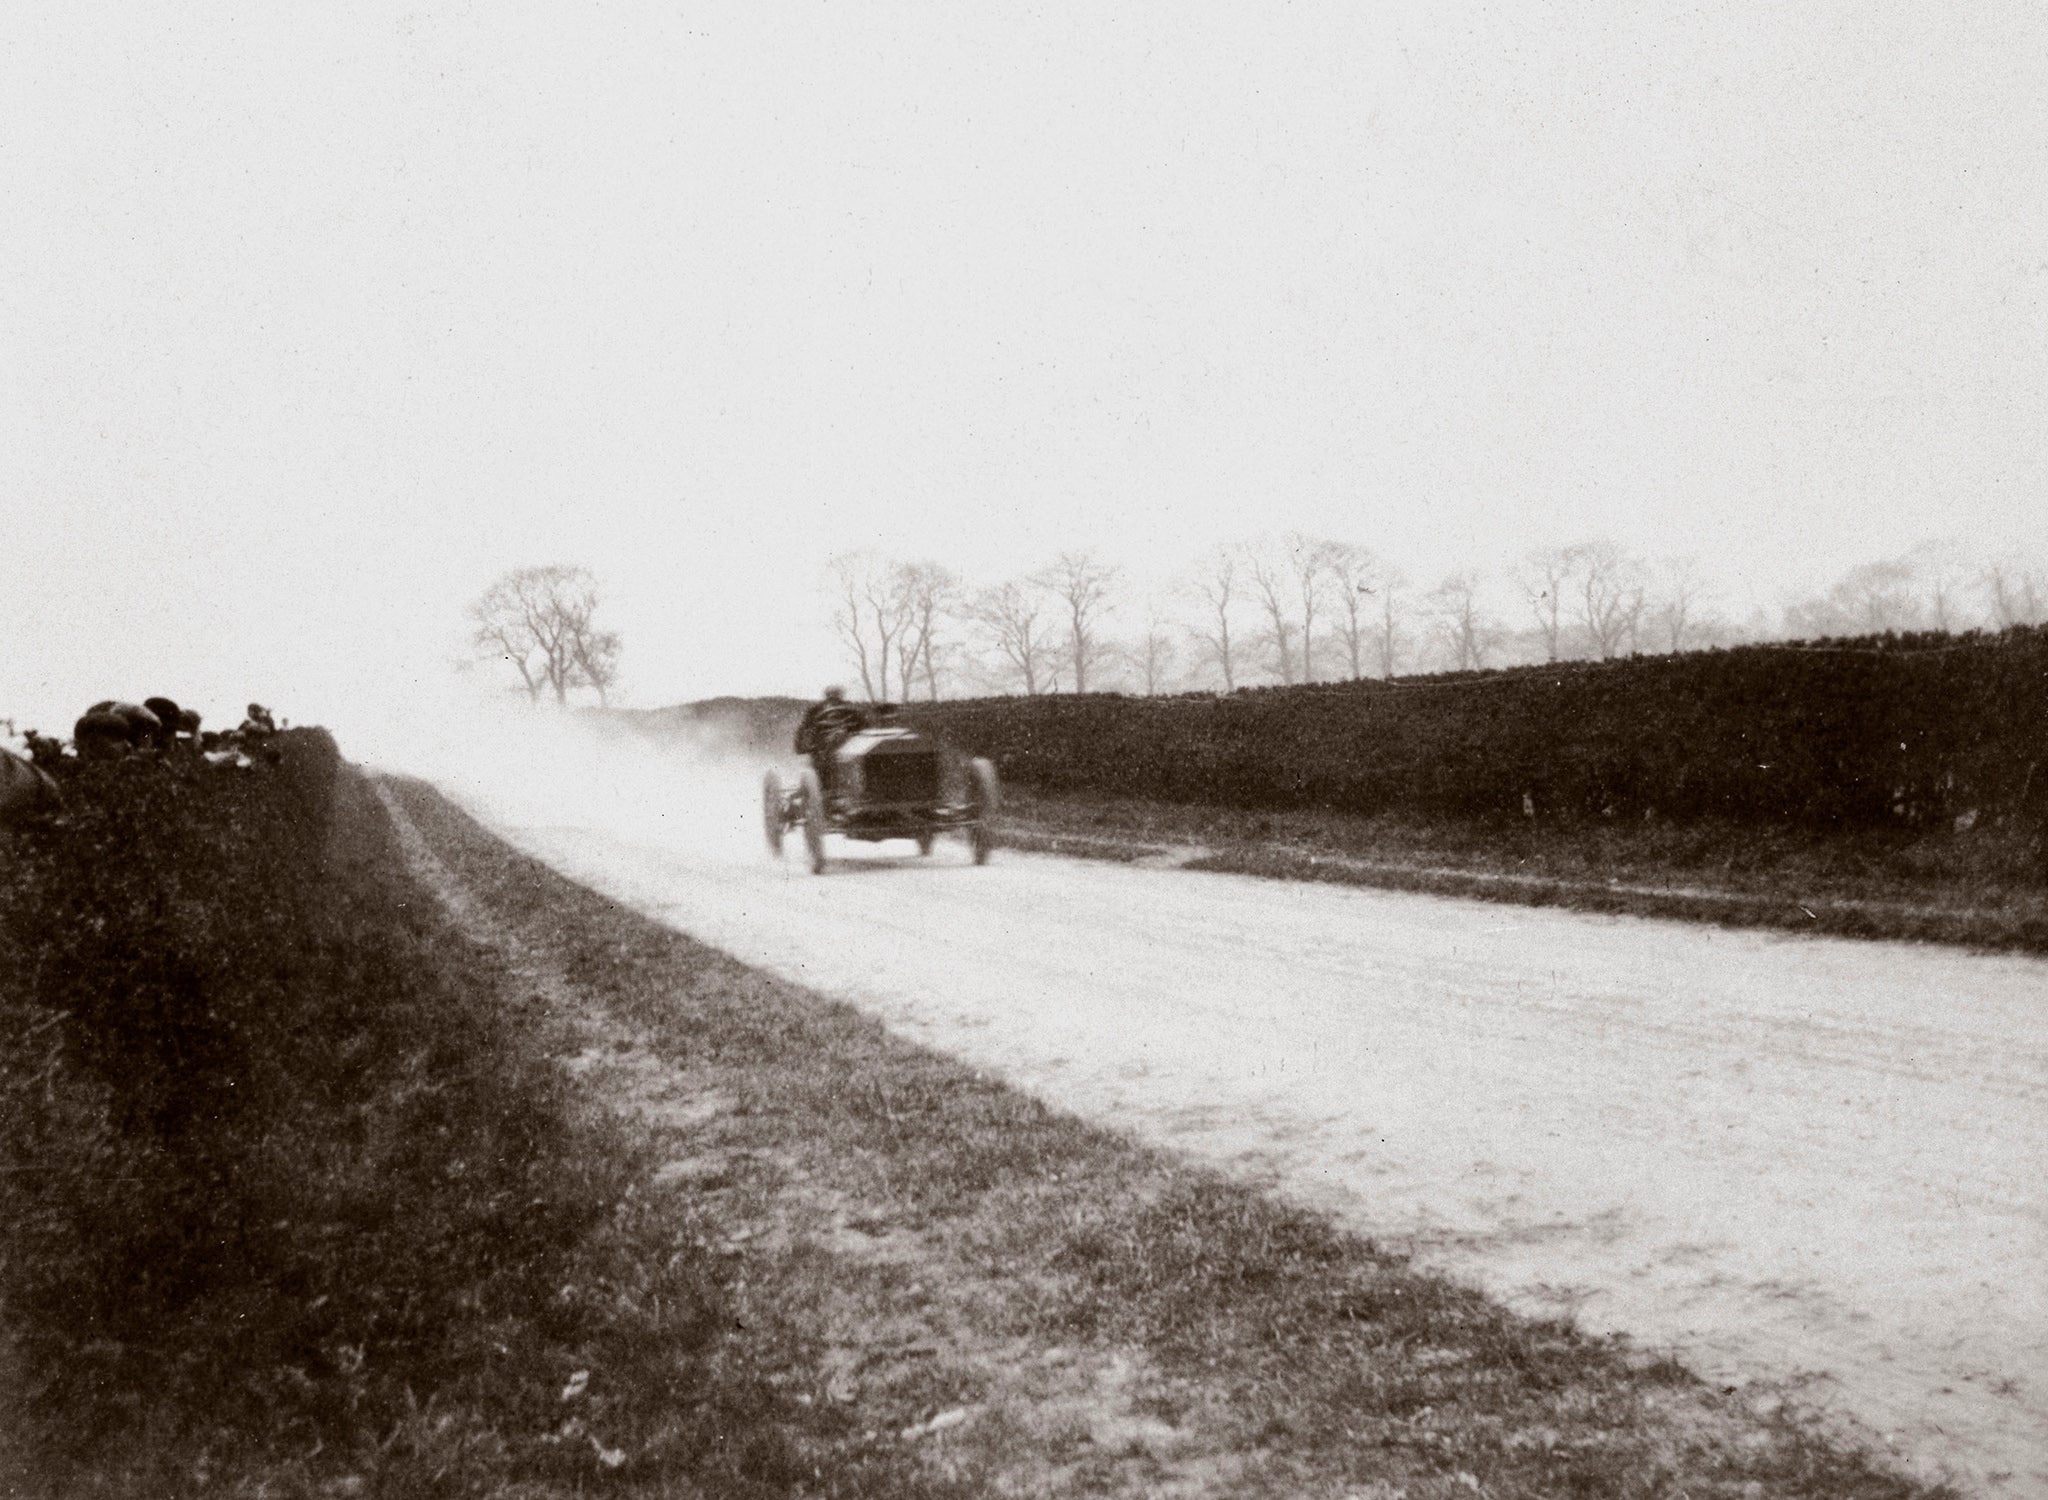 UNITED KINGDOM - DECEMBER 04:  Photograph taken from an album of images compiled by English motor car manufacturer and aviator Charles Stewart Rolls (1877-1910). It shows Rolls competing in the elimination trial for the prestigious Gordon Bennett Trophy race, which was to be held at Athy in Ireland in 1903. The elimination trial, to select the final driver for the British team was held on the Duke of Portland�s estate at Welbeck, Nottinghamshire. Driving his Napier Racer, Rolls, who was well known on the motor racing circuit, finished second, thus failing to gain selection. Napier was the first British manufacturer to produce cars specifically for motor racing, and they were the first cars to compete painted in the famous British Racing Green colour.  (Photo by SSPL/Getty Images)